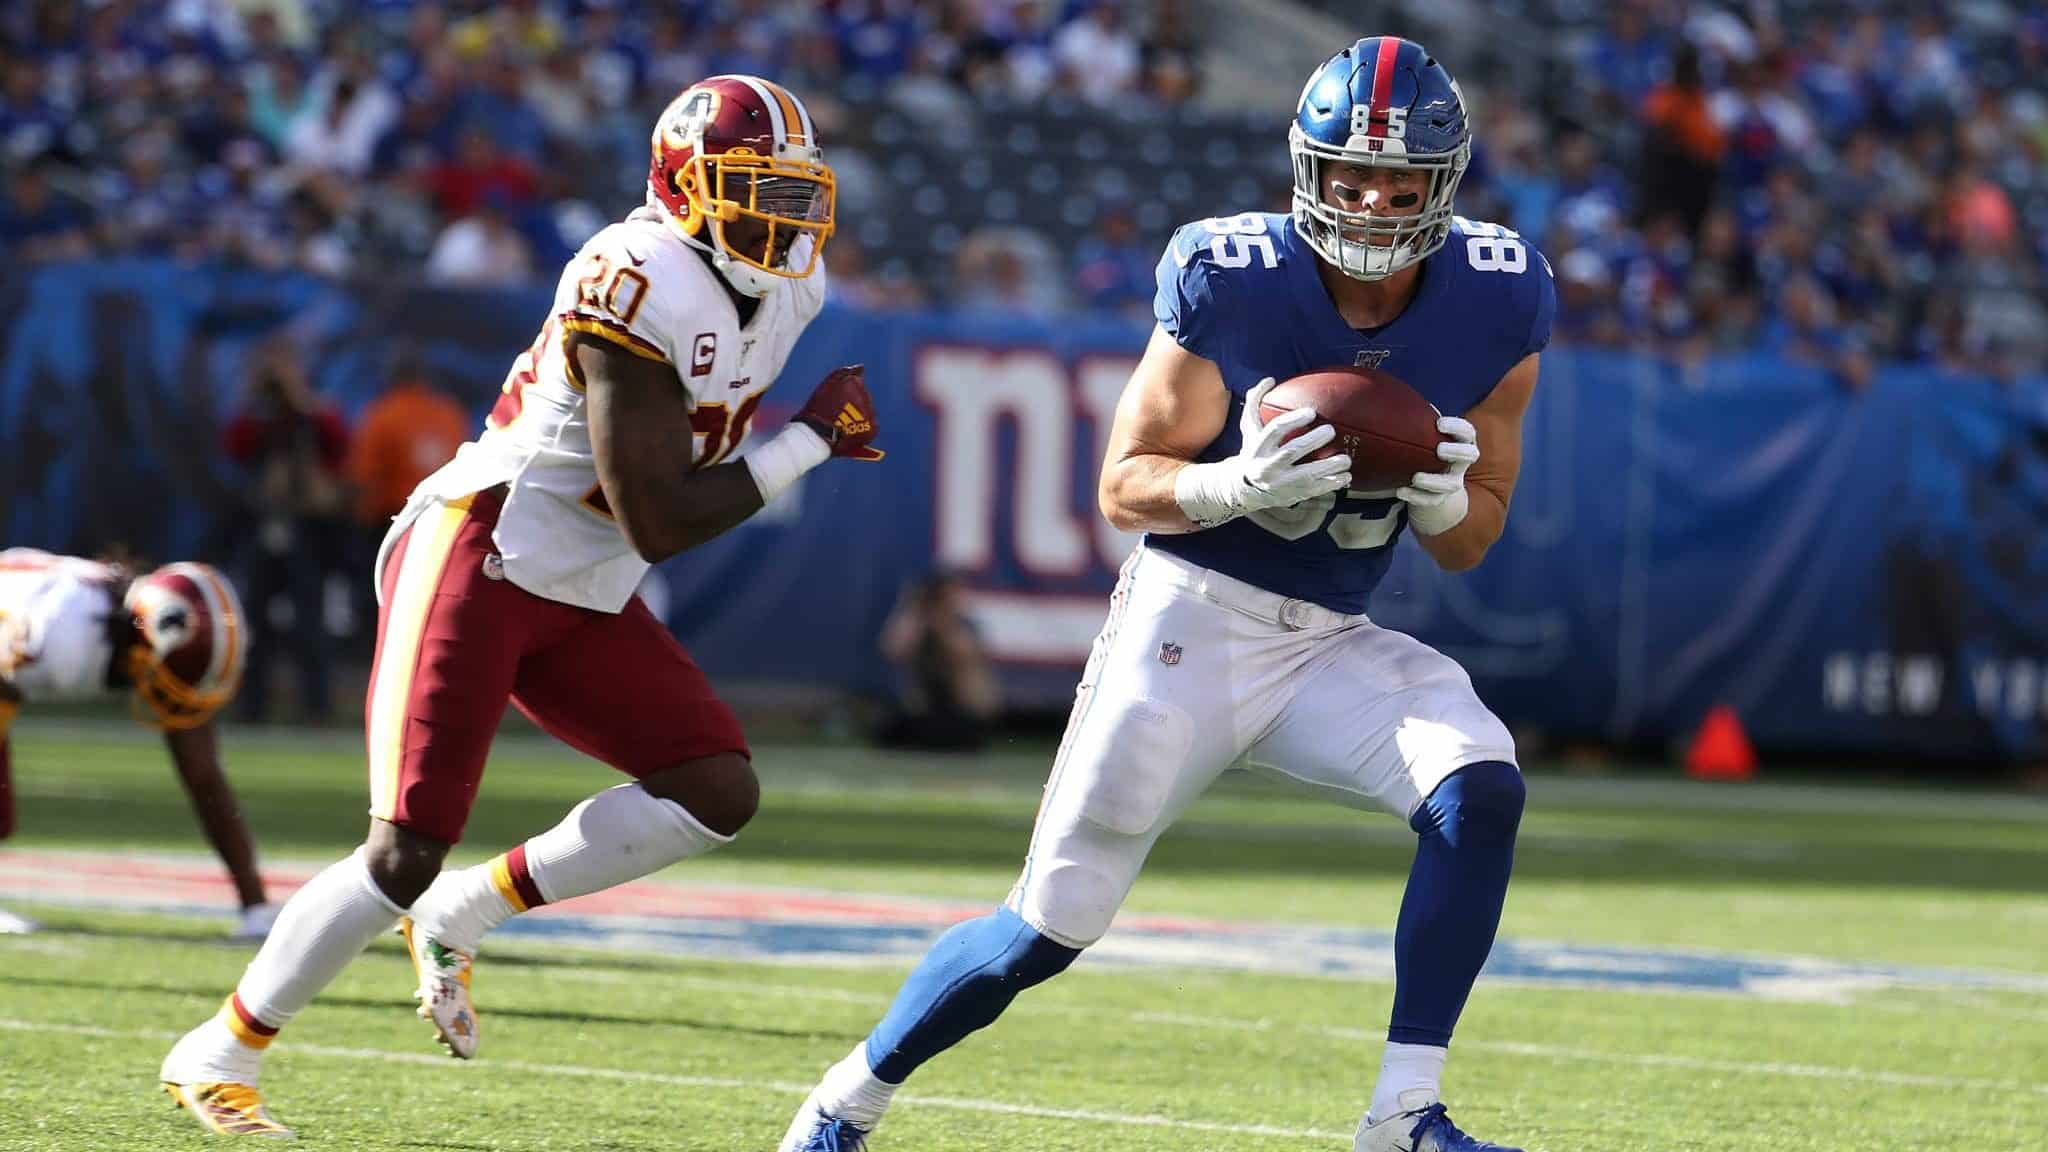 EAST RUTHERFORD, NEW JERSEY - SEPTEMBER 29: Rhett Ellison #85 of the New York Giants catches the ball against Landon Collins #20 of the Washington Redskins during their game at MetLife Stadium on September 29, 2019 in East Rutherford, New Jersey.